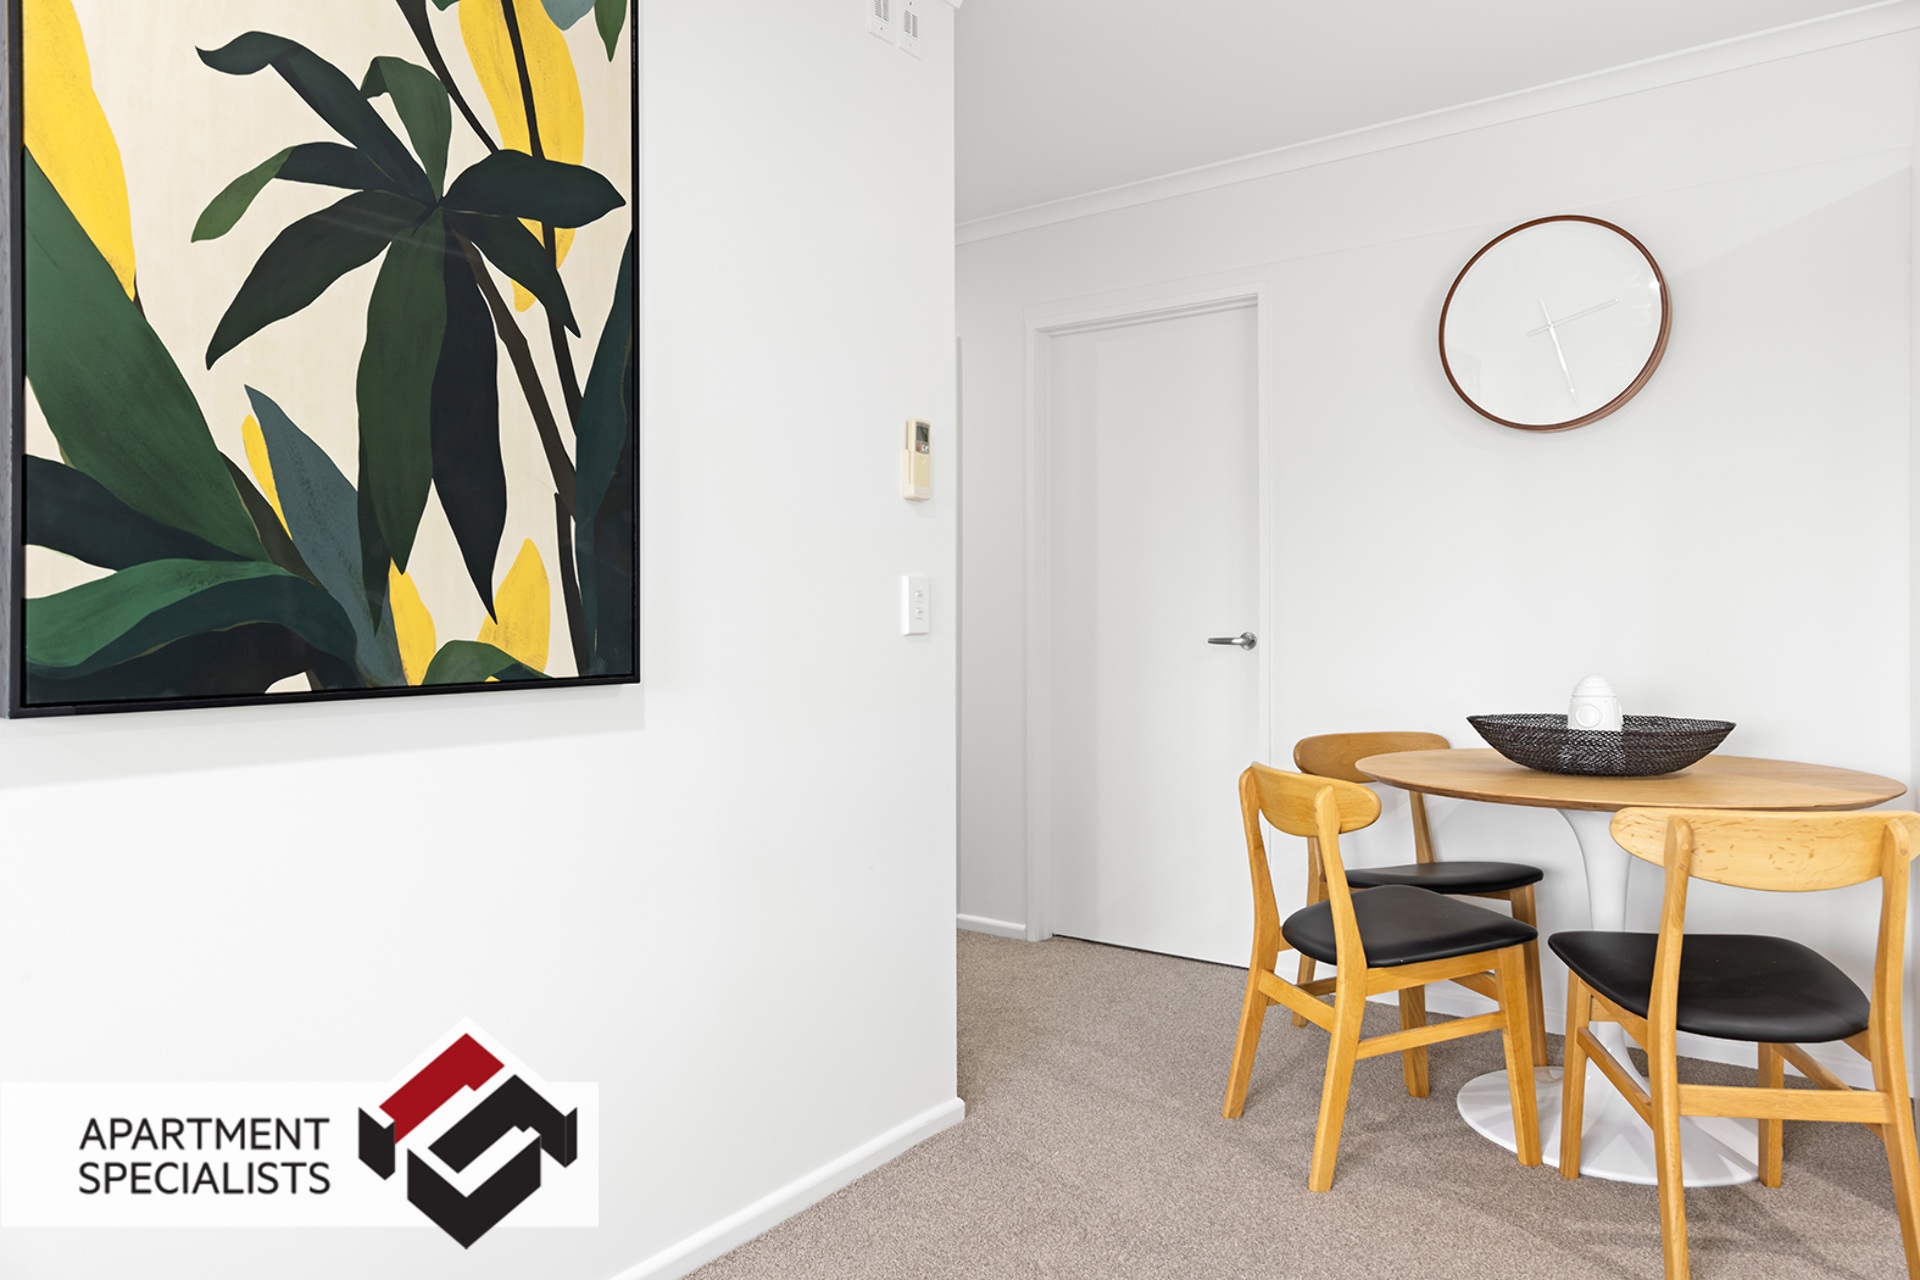 11 | 363 Queen Street, City Centre | Apartment Specialists